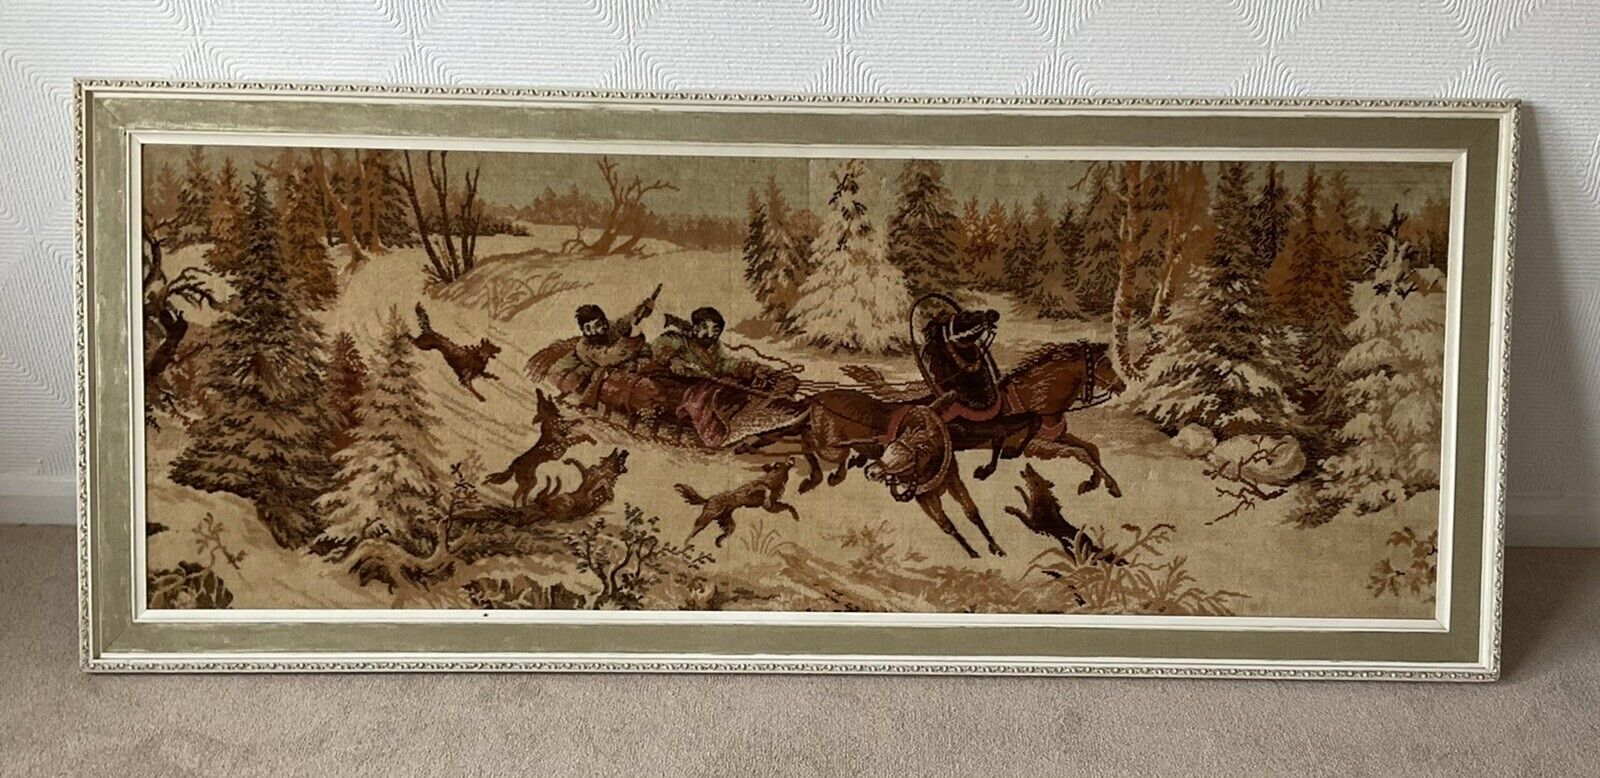 Antique Valuations: vintage framed massive TROIKA Russian themed tapestry / carpet picture 183x65cm